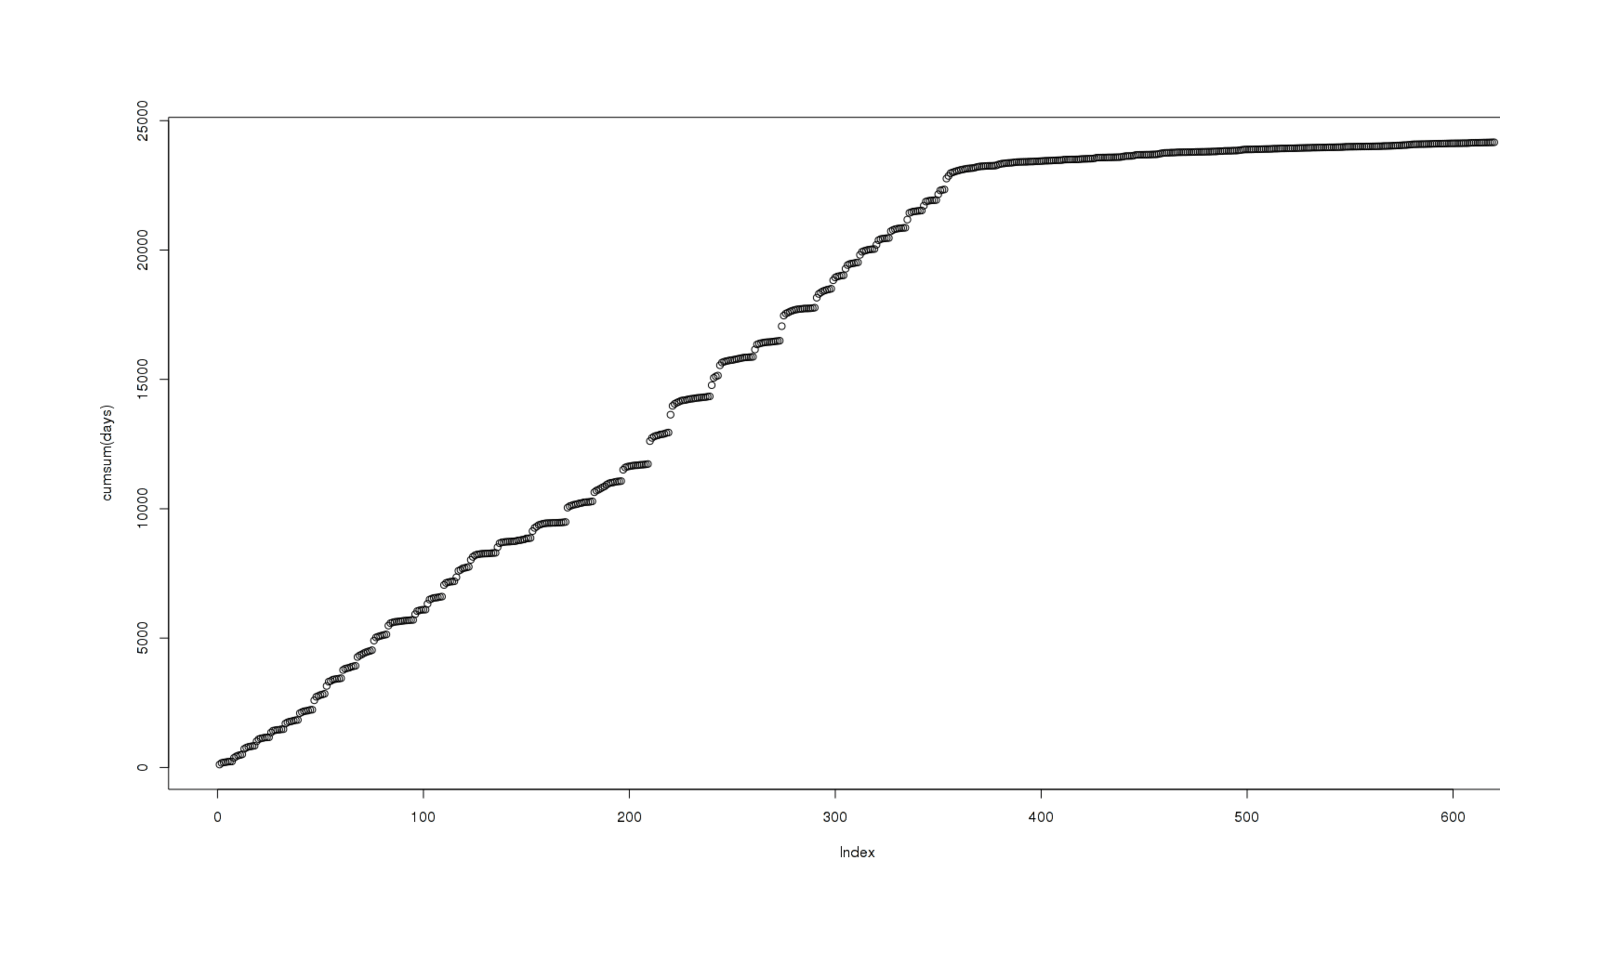 Total reviews as a function of time